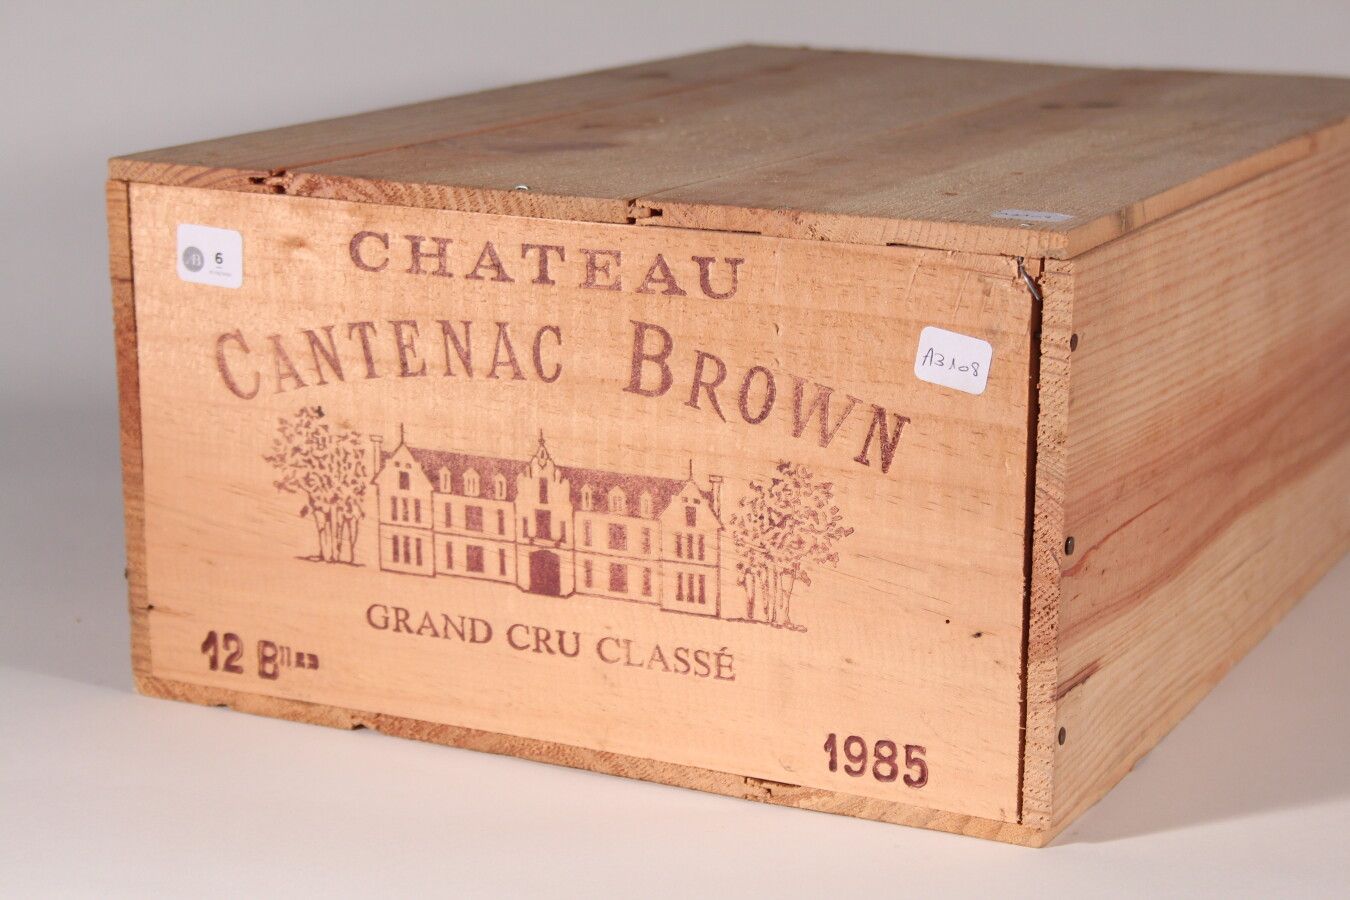 Null 1985 - Château Cantenac Brown

Margaux Red - 12 blles CBO